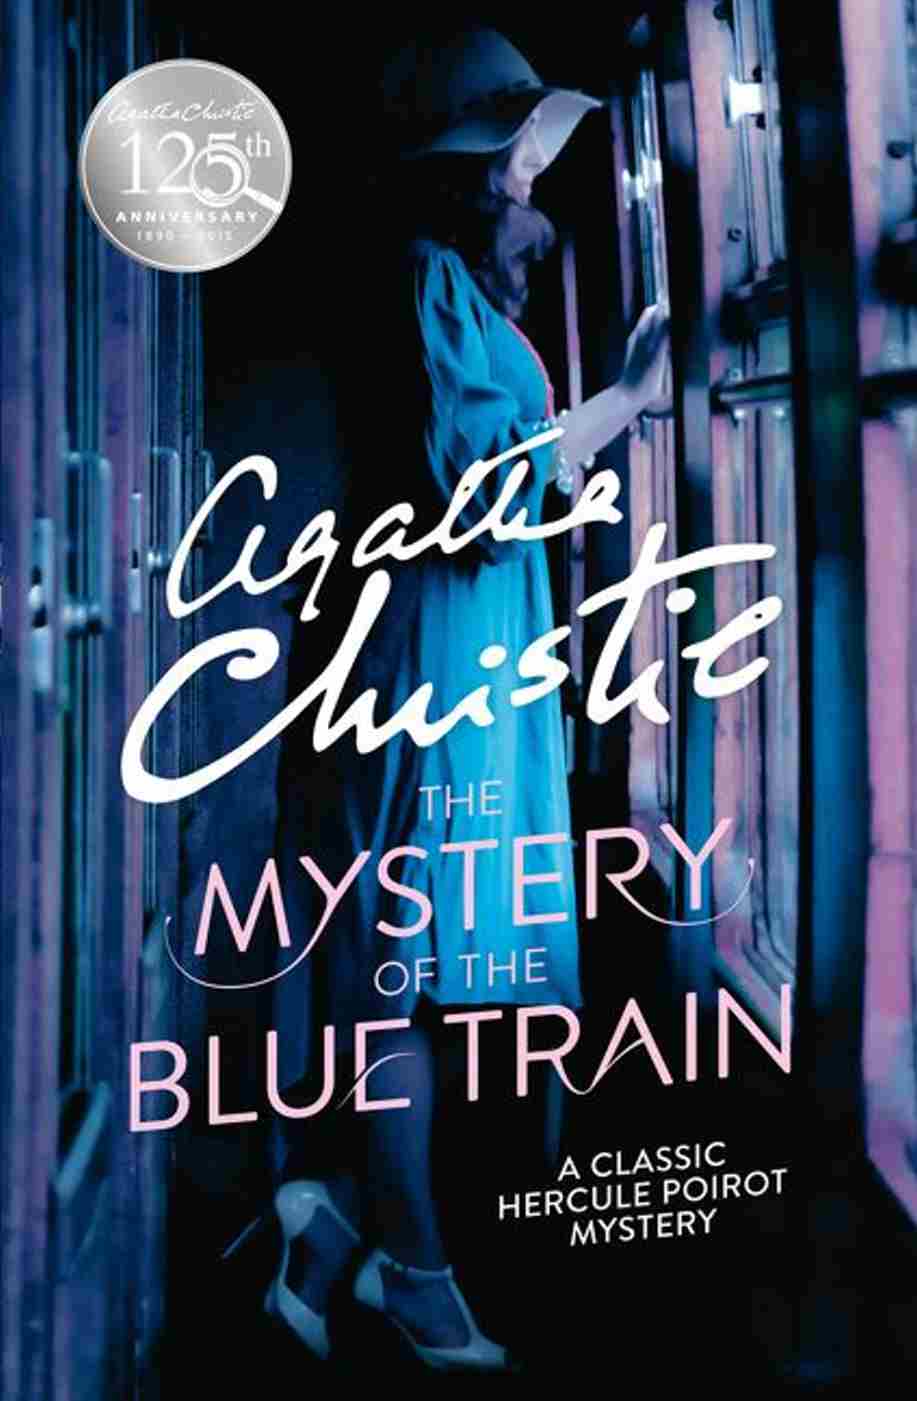 Poirot：The Mystery of the Blue Train